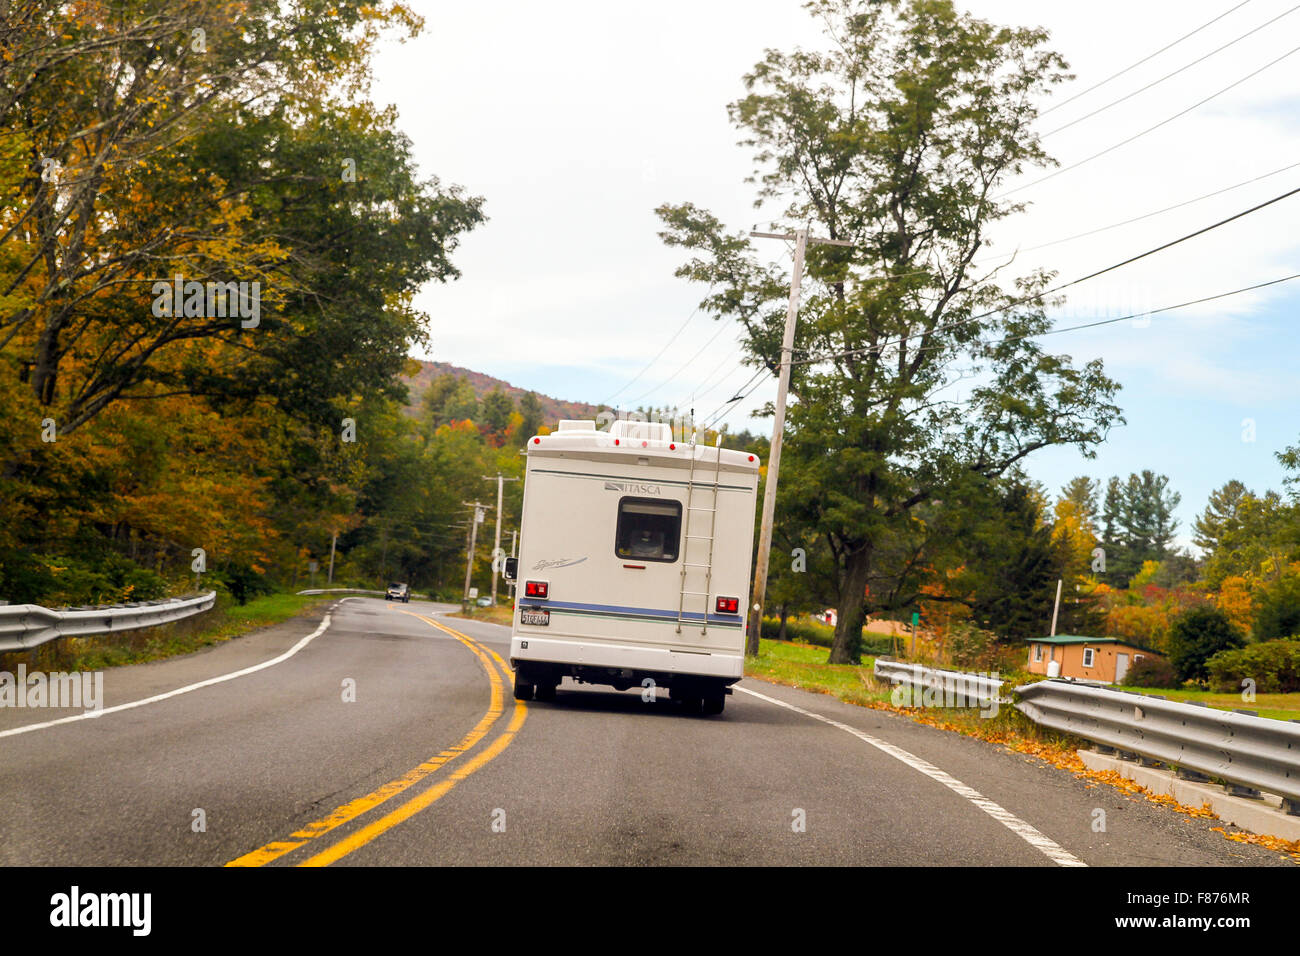 An RV on the road in autumn, Massachusetts, United States Stock Photo